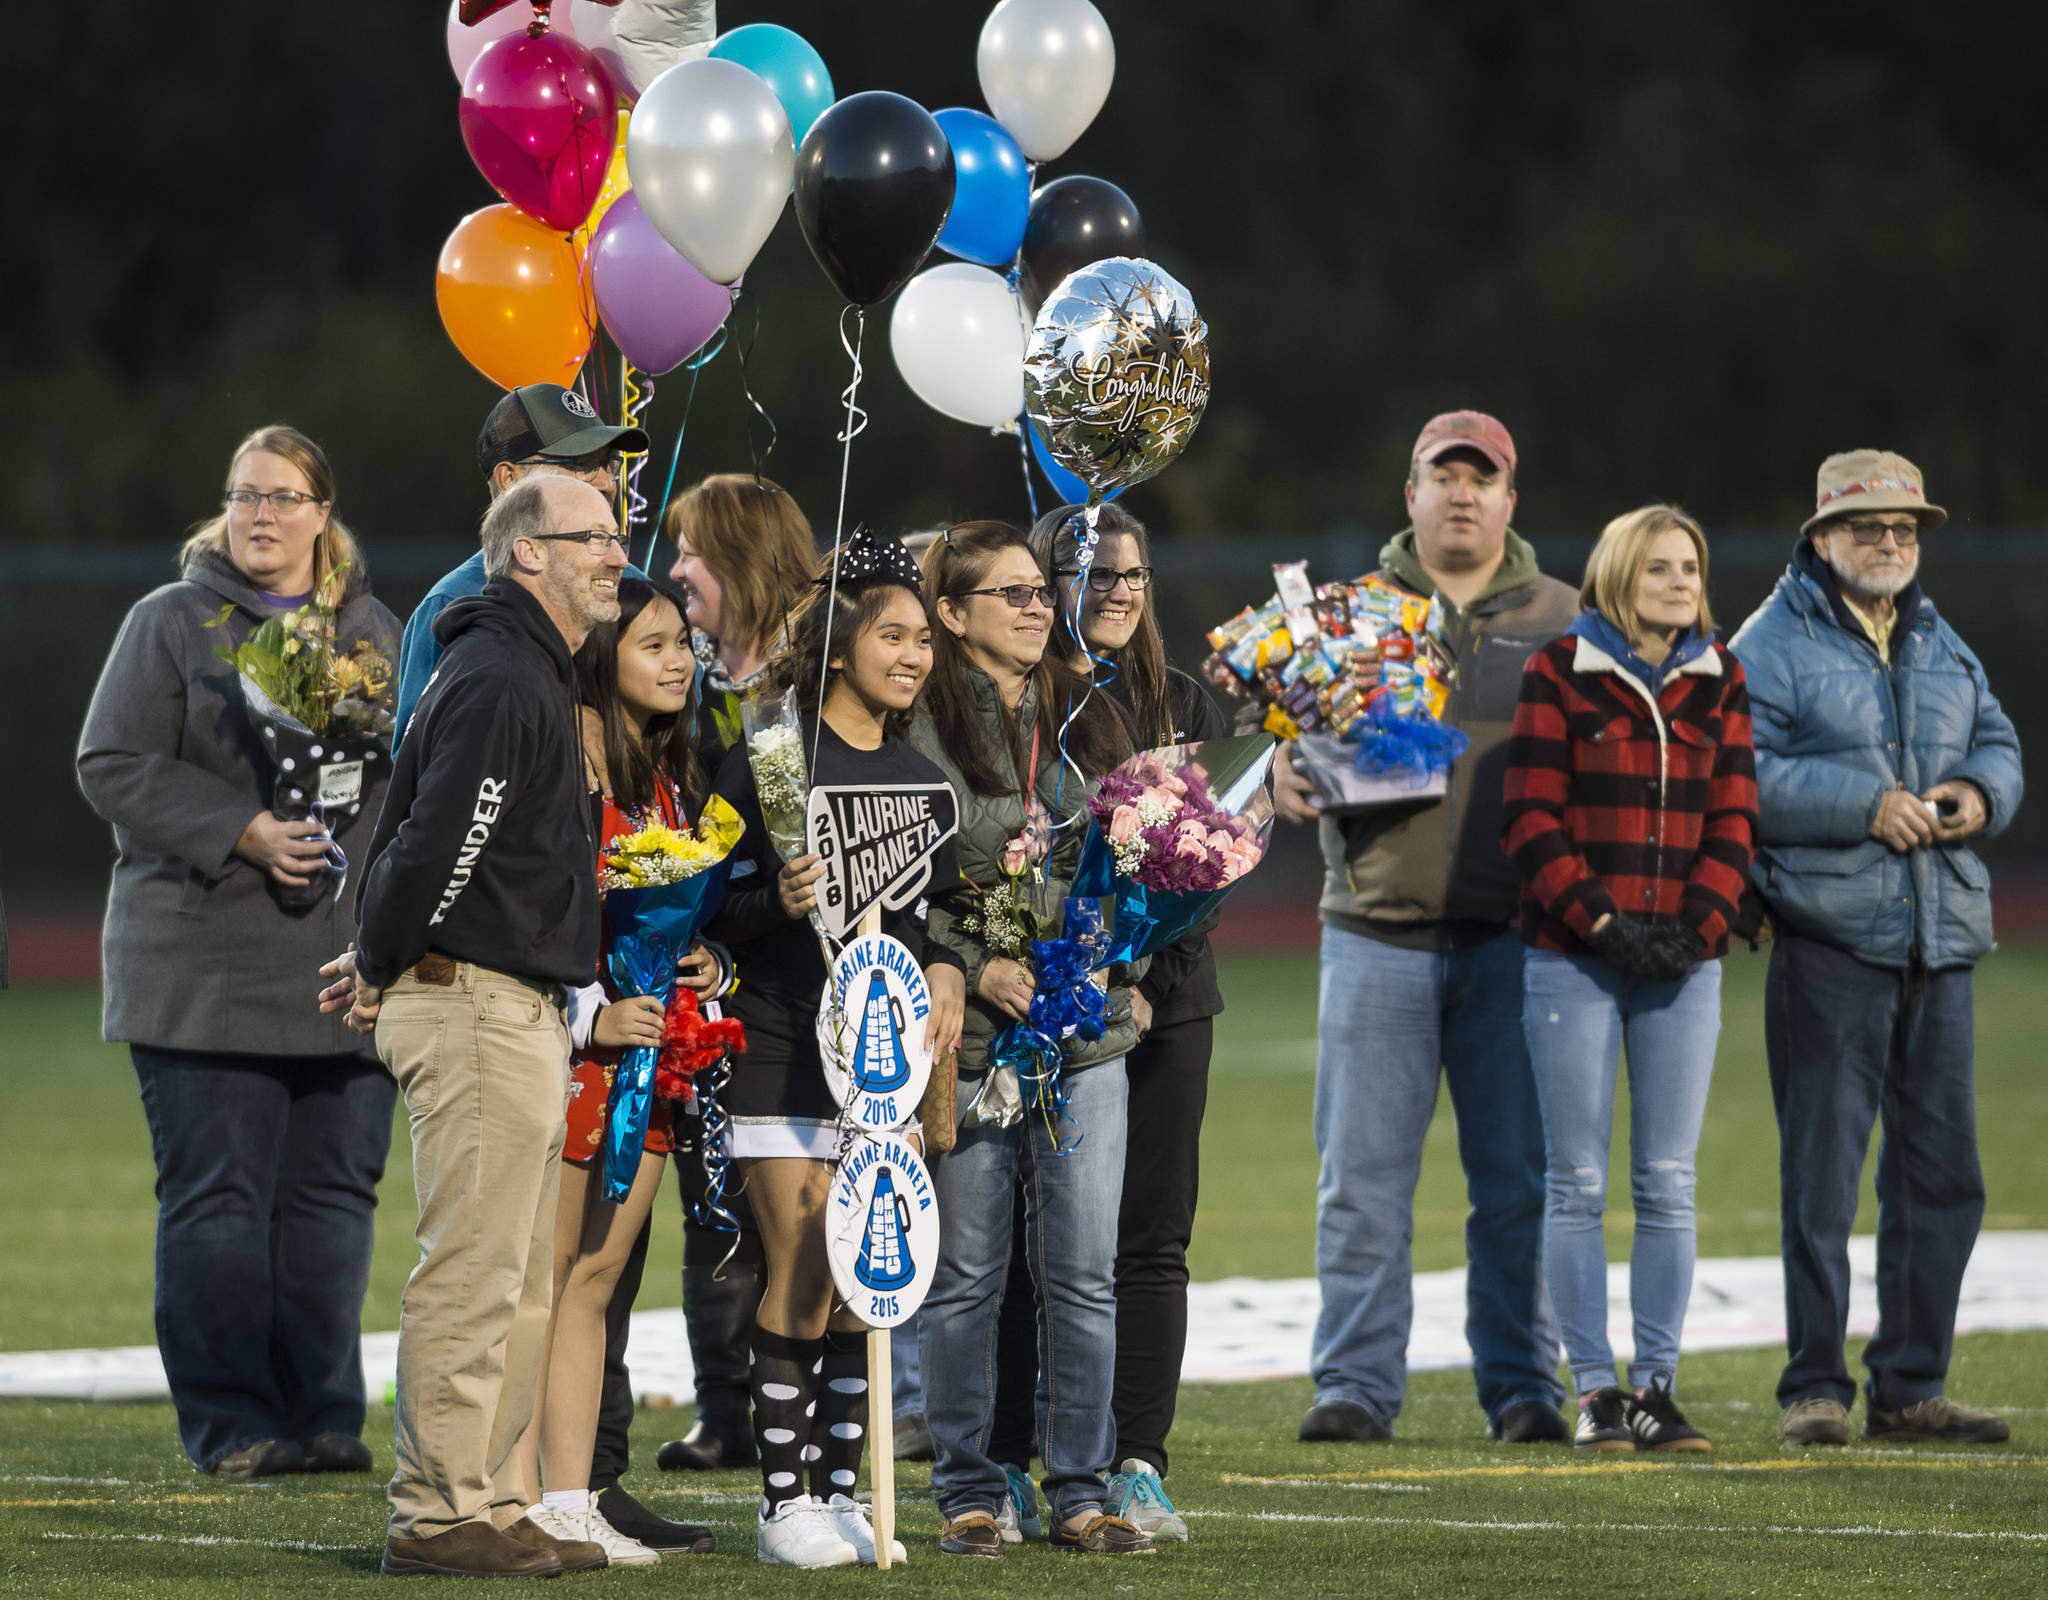 Family and friends celebrate senior night with cheerleaders and players before Juneau United’s game against Colony at Thunder Mountain High School on Friday, Sept. 21, 2018. (Michael Penn | Juneau Empire)